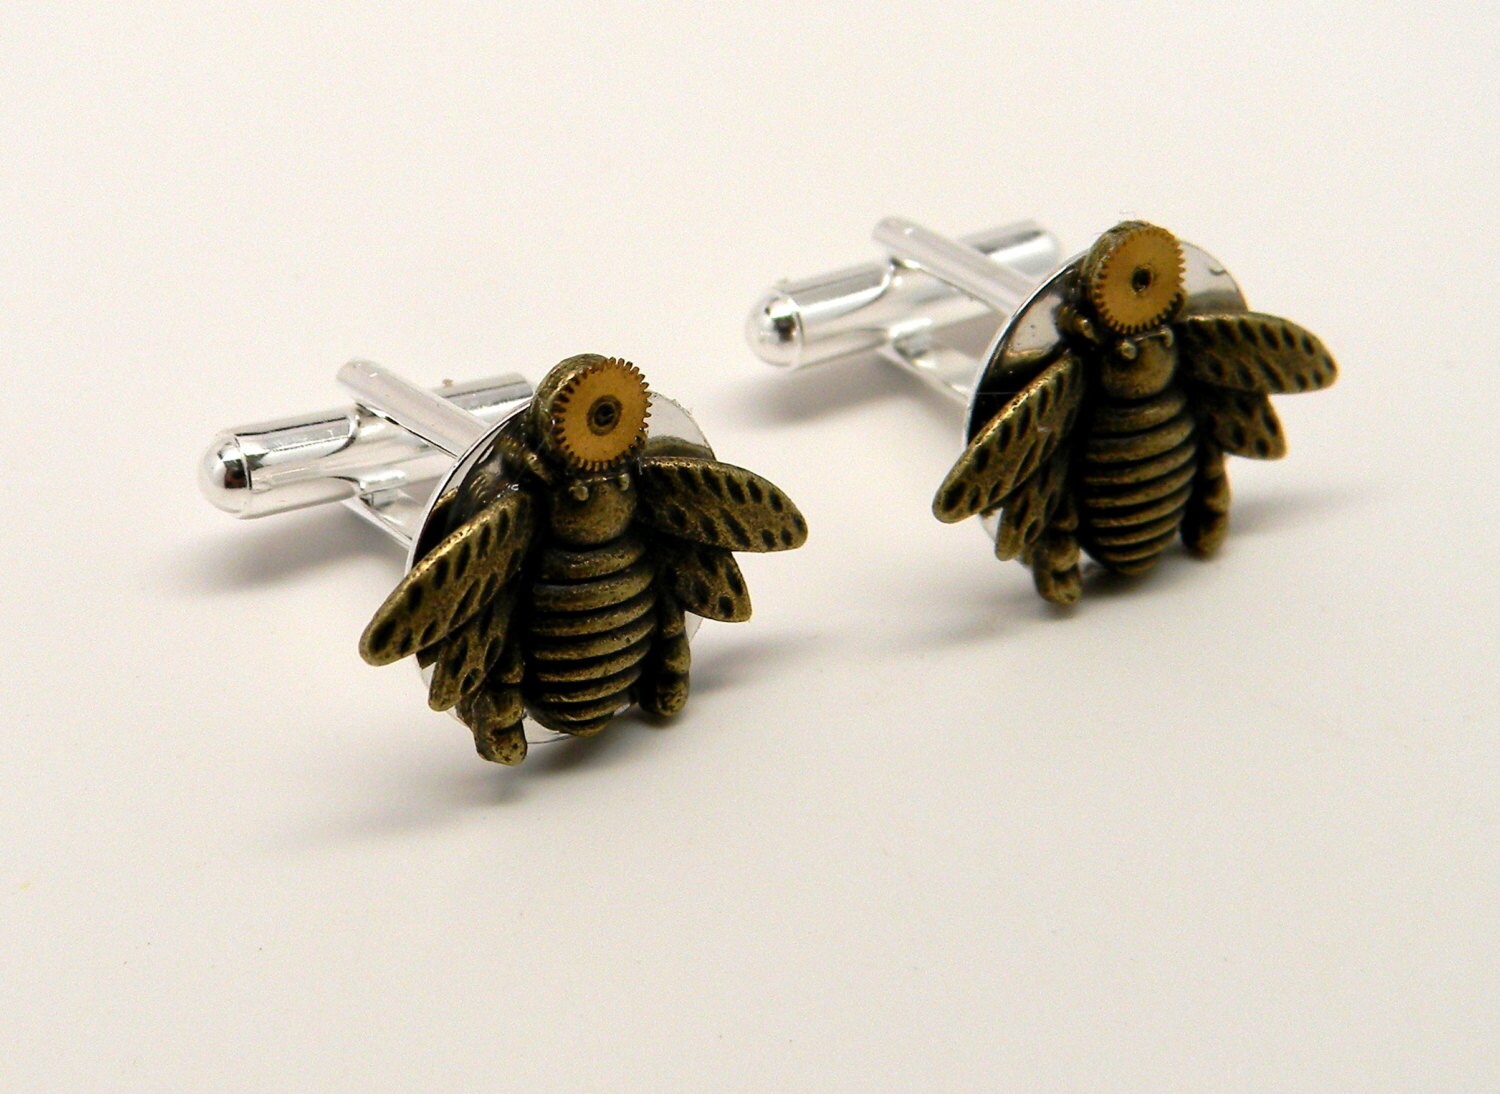 Steampunk cuff links with bees